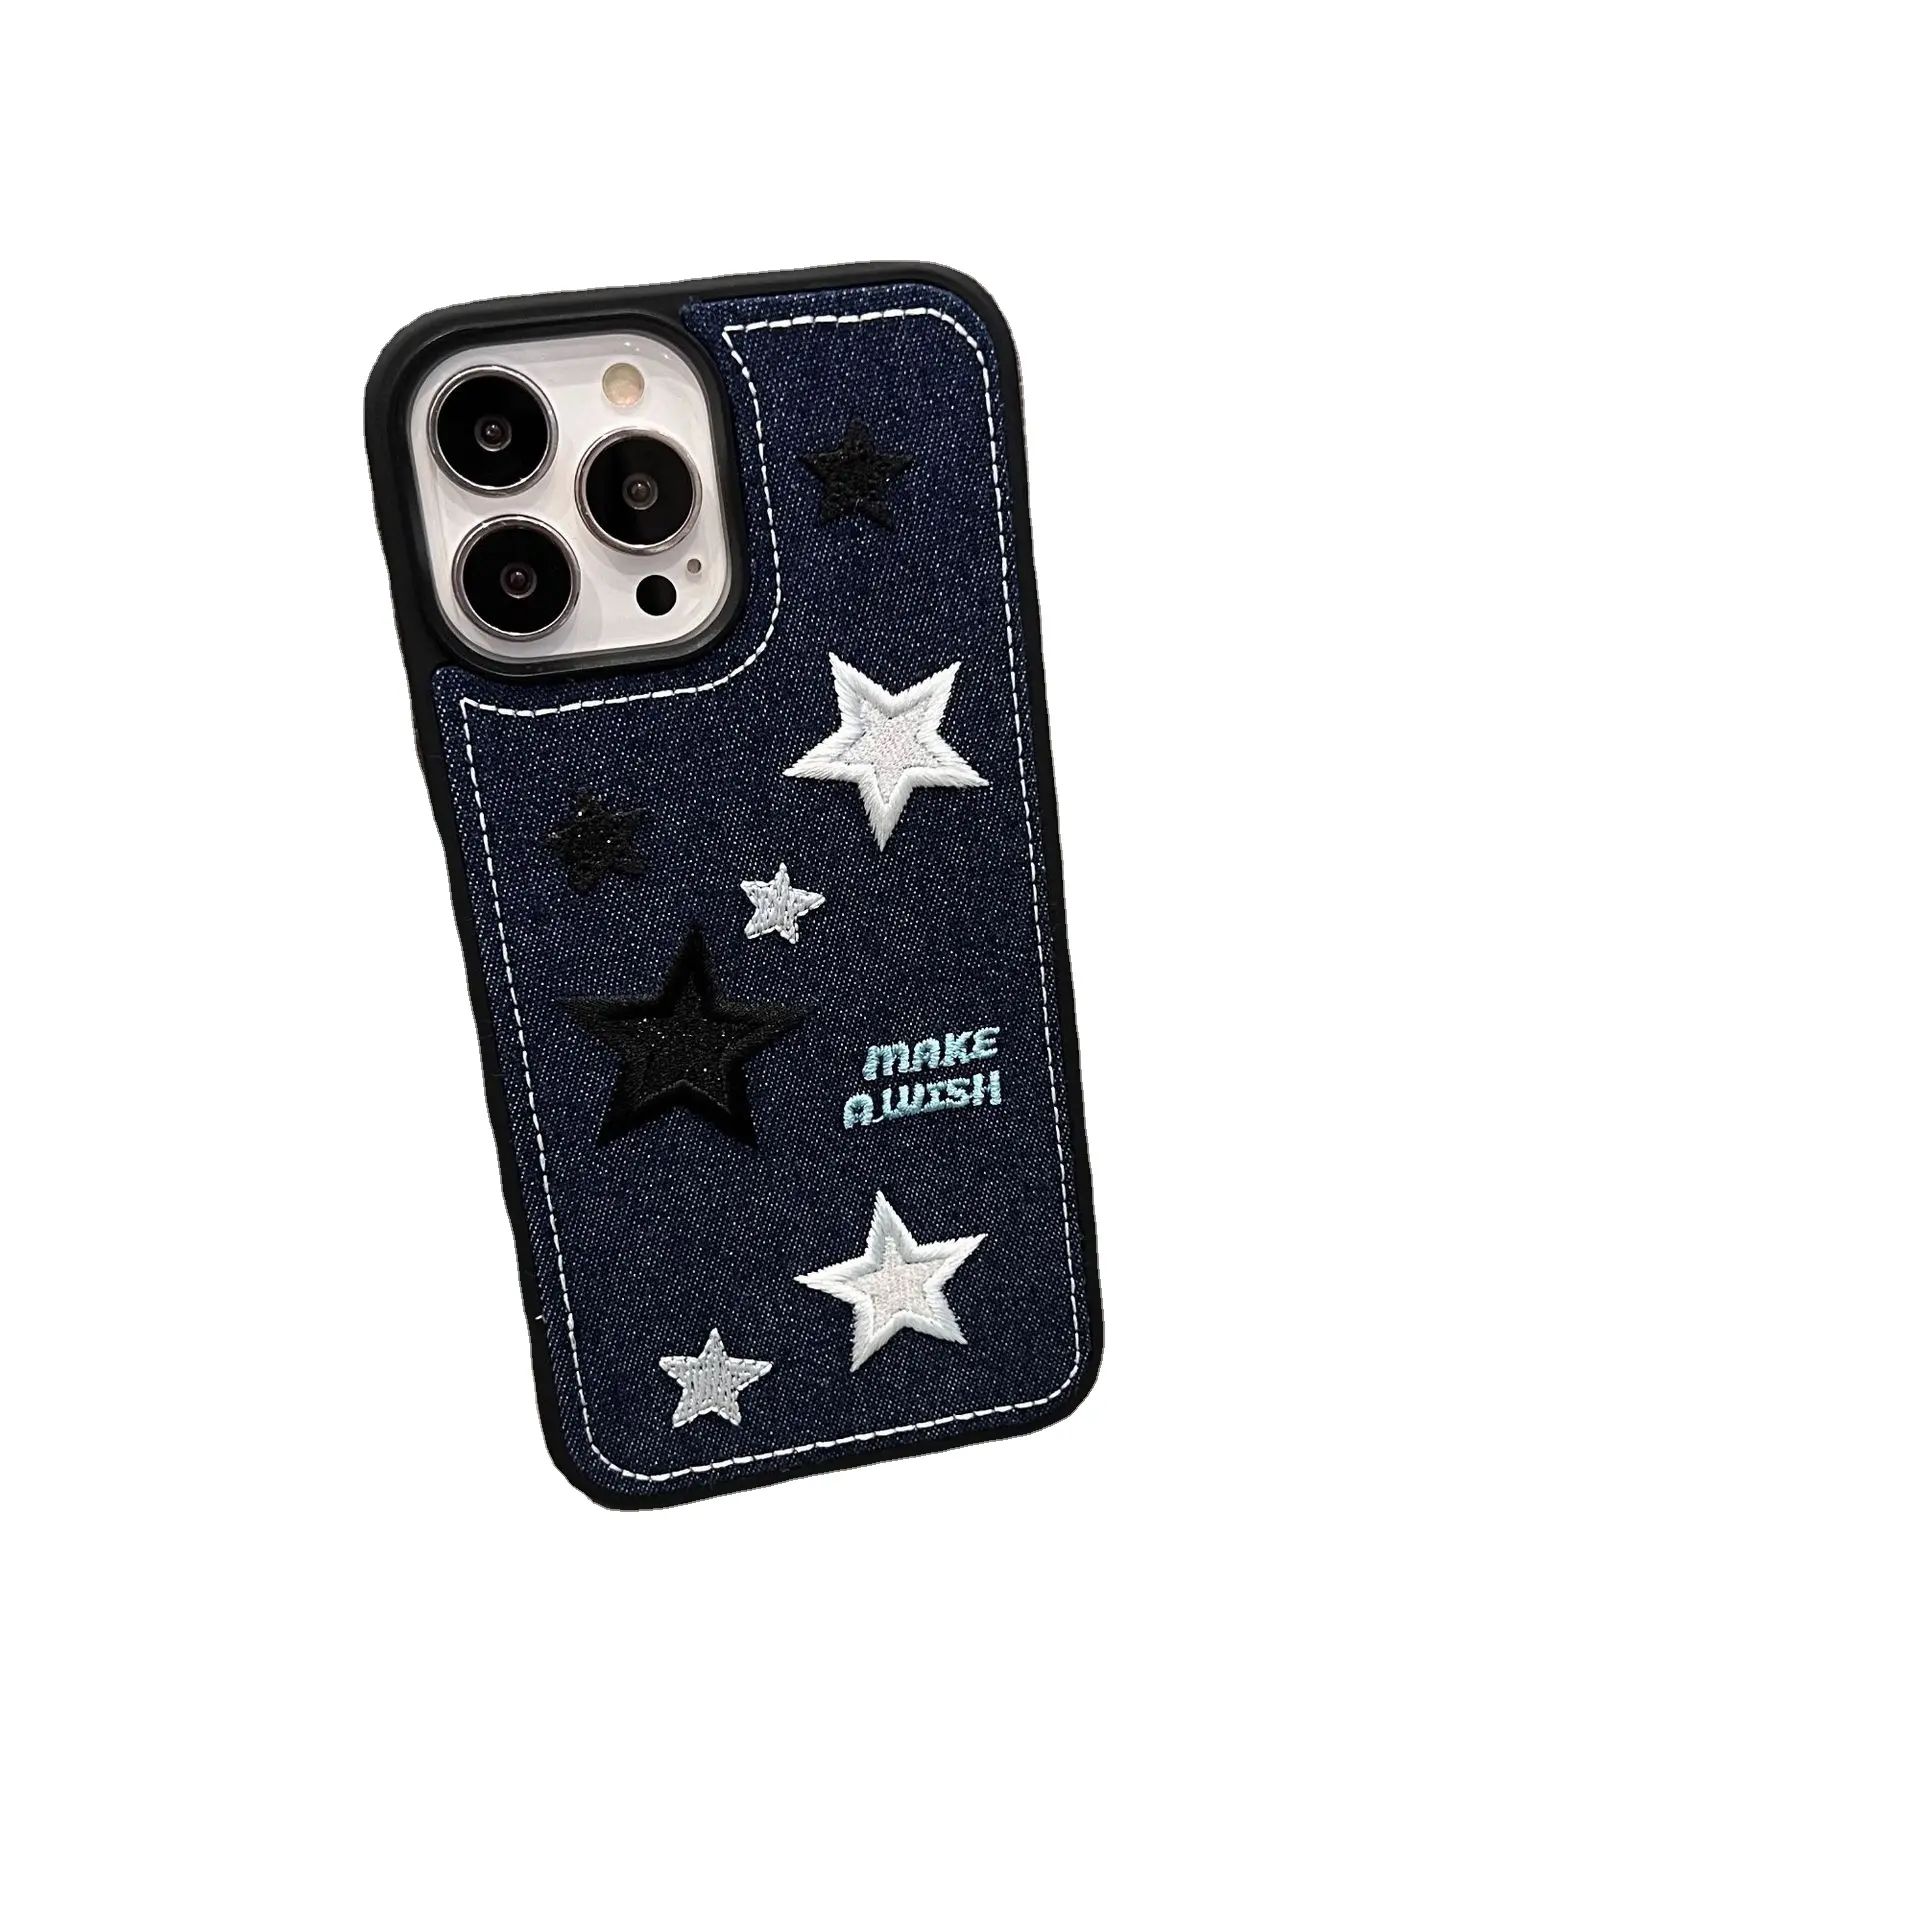 Luxury Simple Jeans Embroidery Pattern Cute Star & Letters With Black Edge Protection Mobile Phone Cases For Iphone 14 13 promax